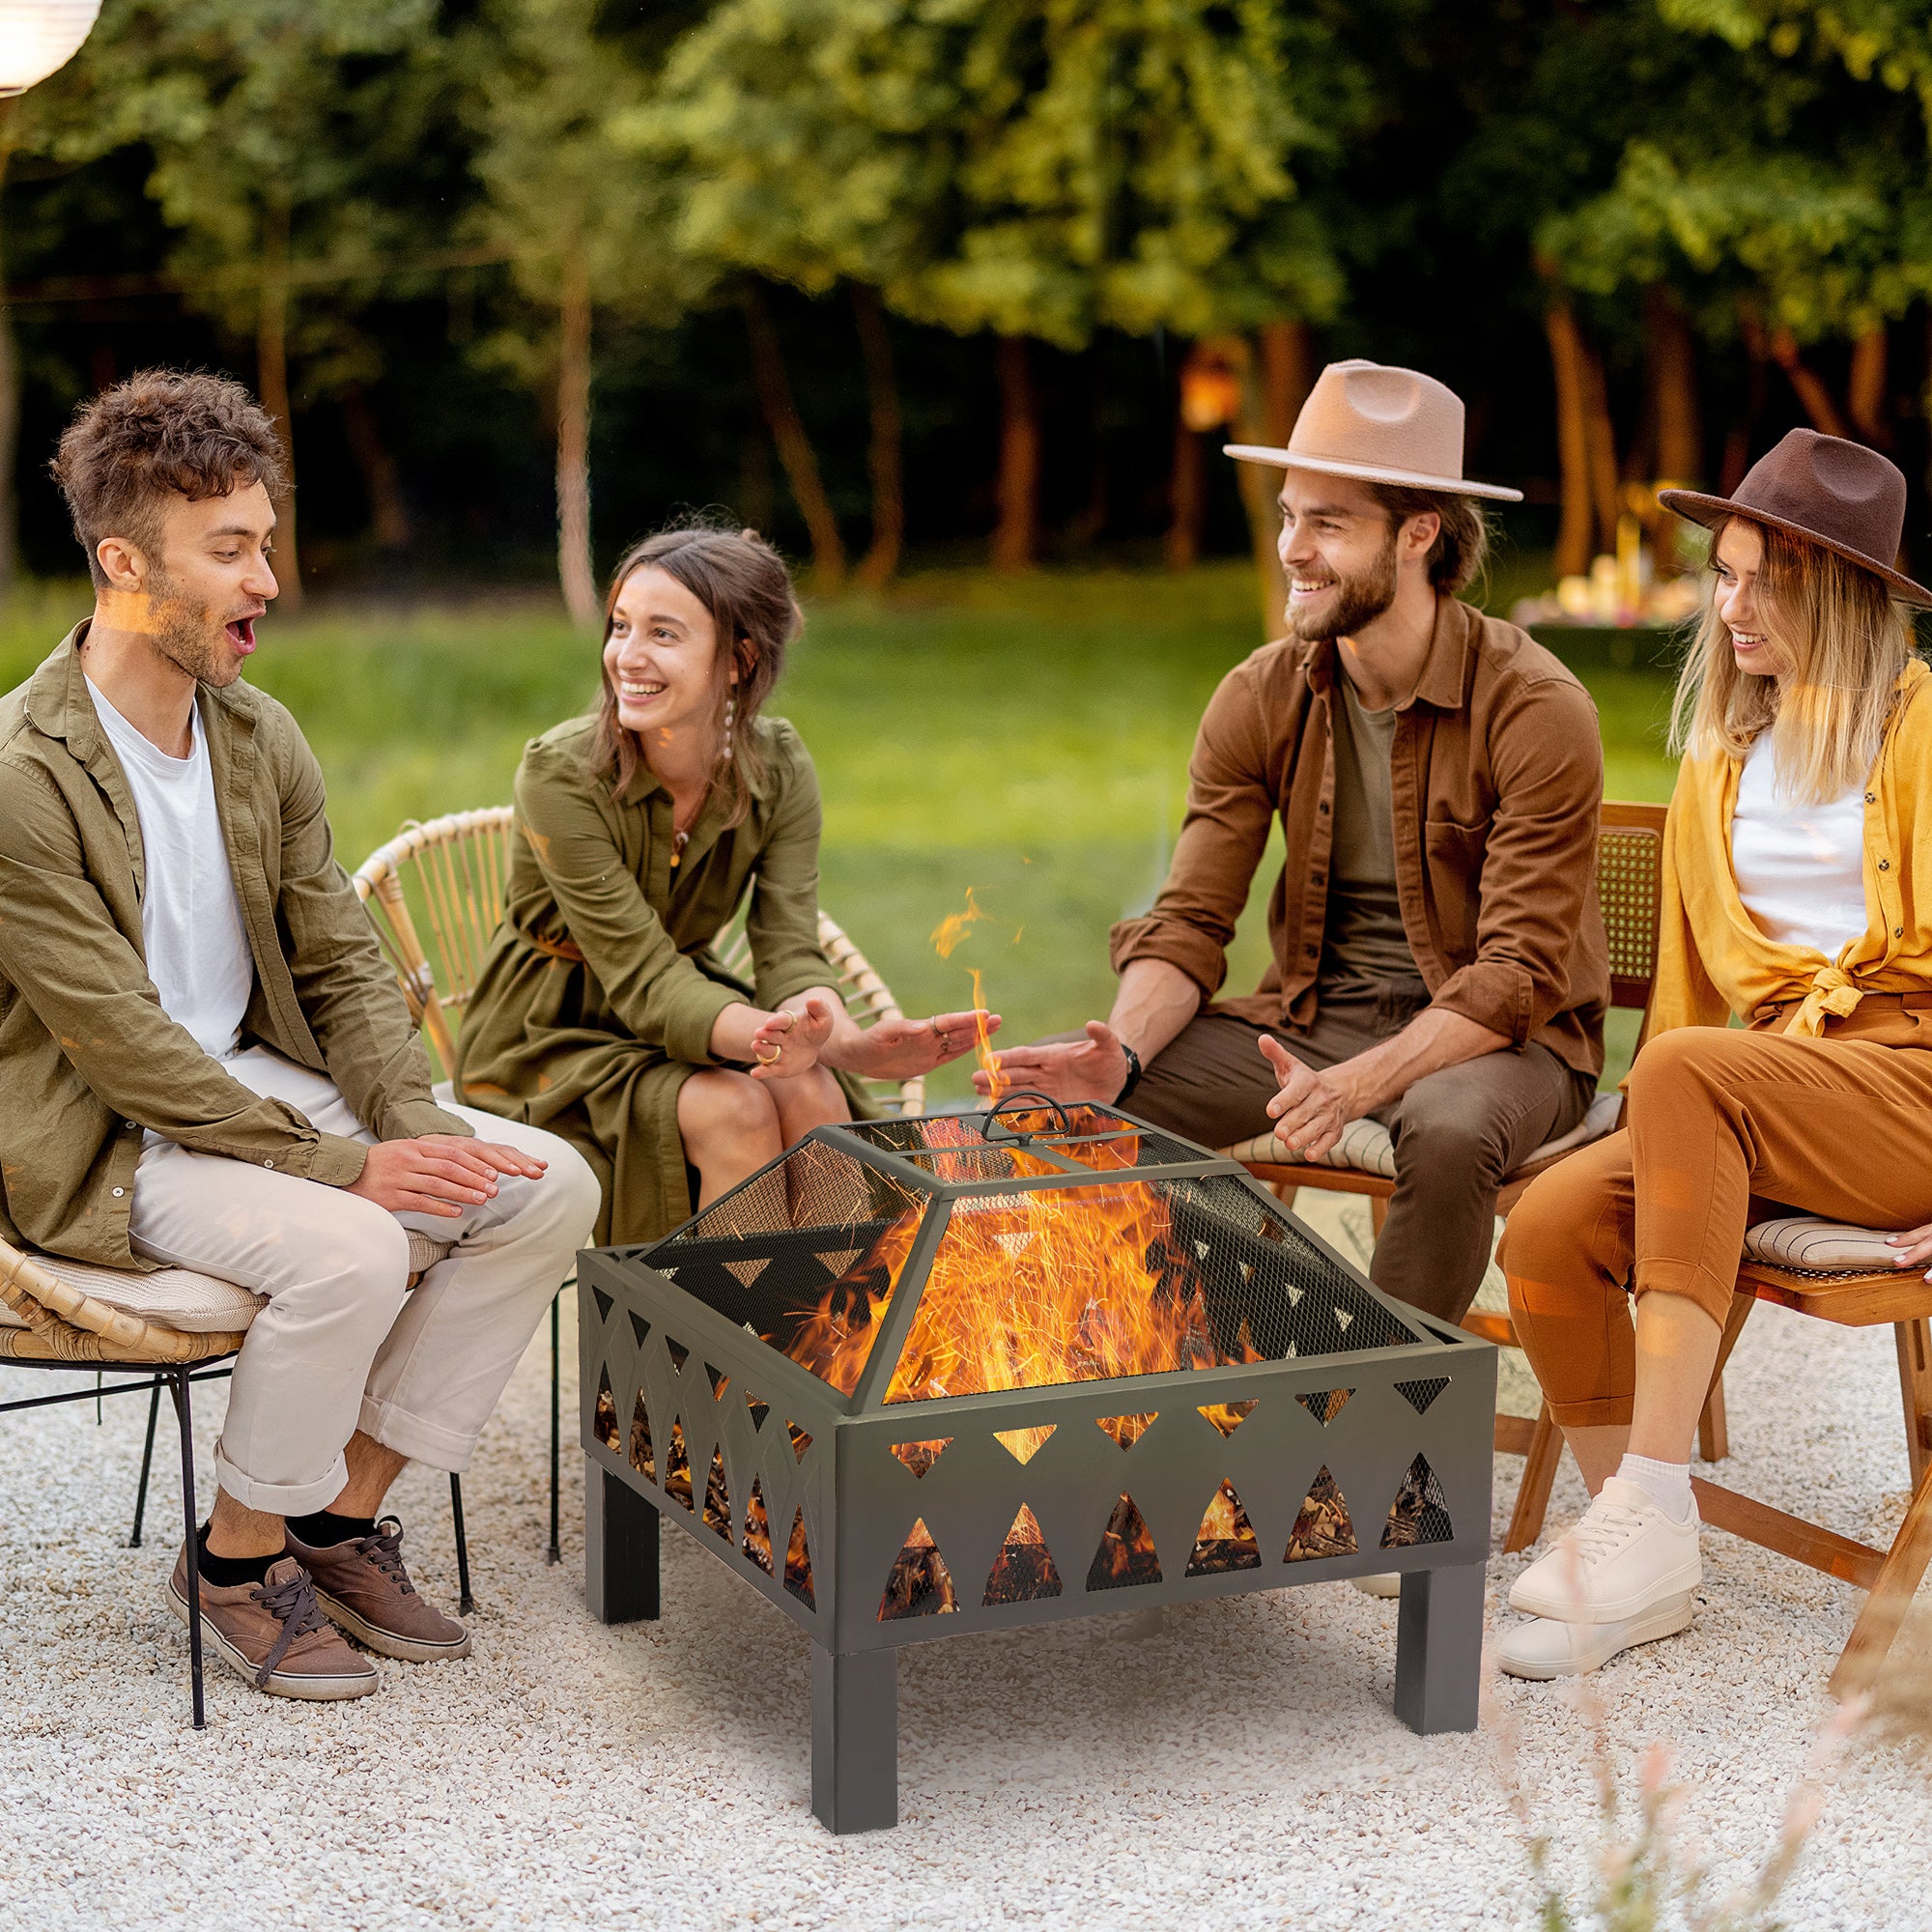 Outsunny Outdoor Fire Pit with Screen Cover, Wood Burner, Log Burning Bowl with Poker for Patio, Backyard, Black - Inspirely